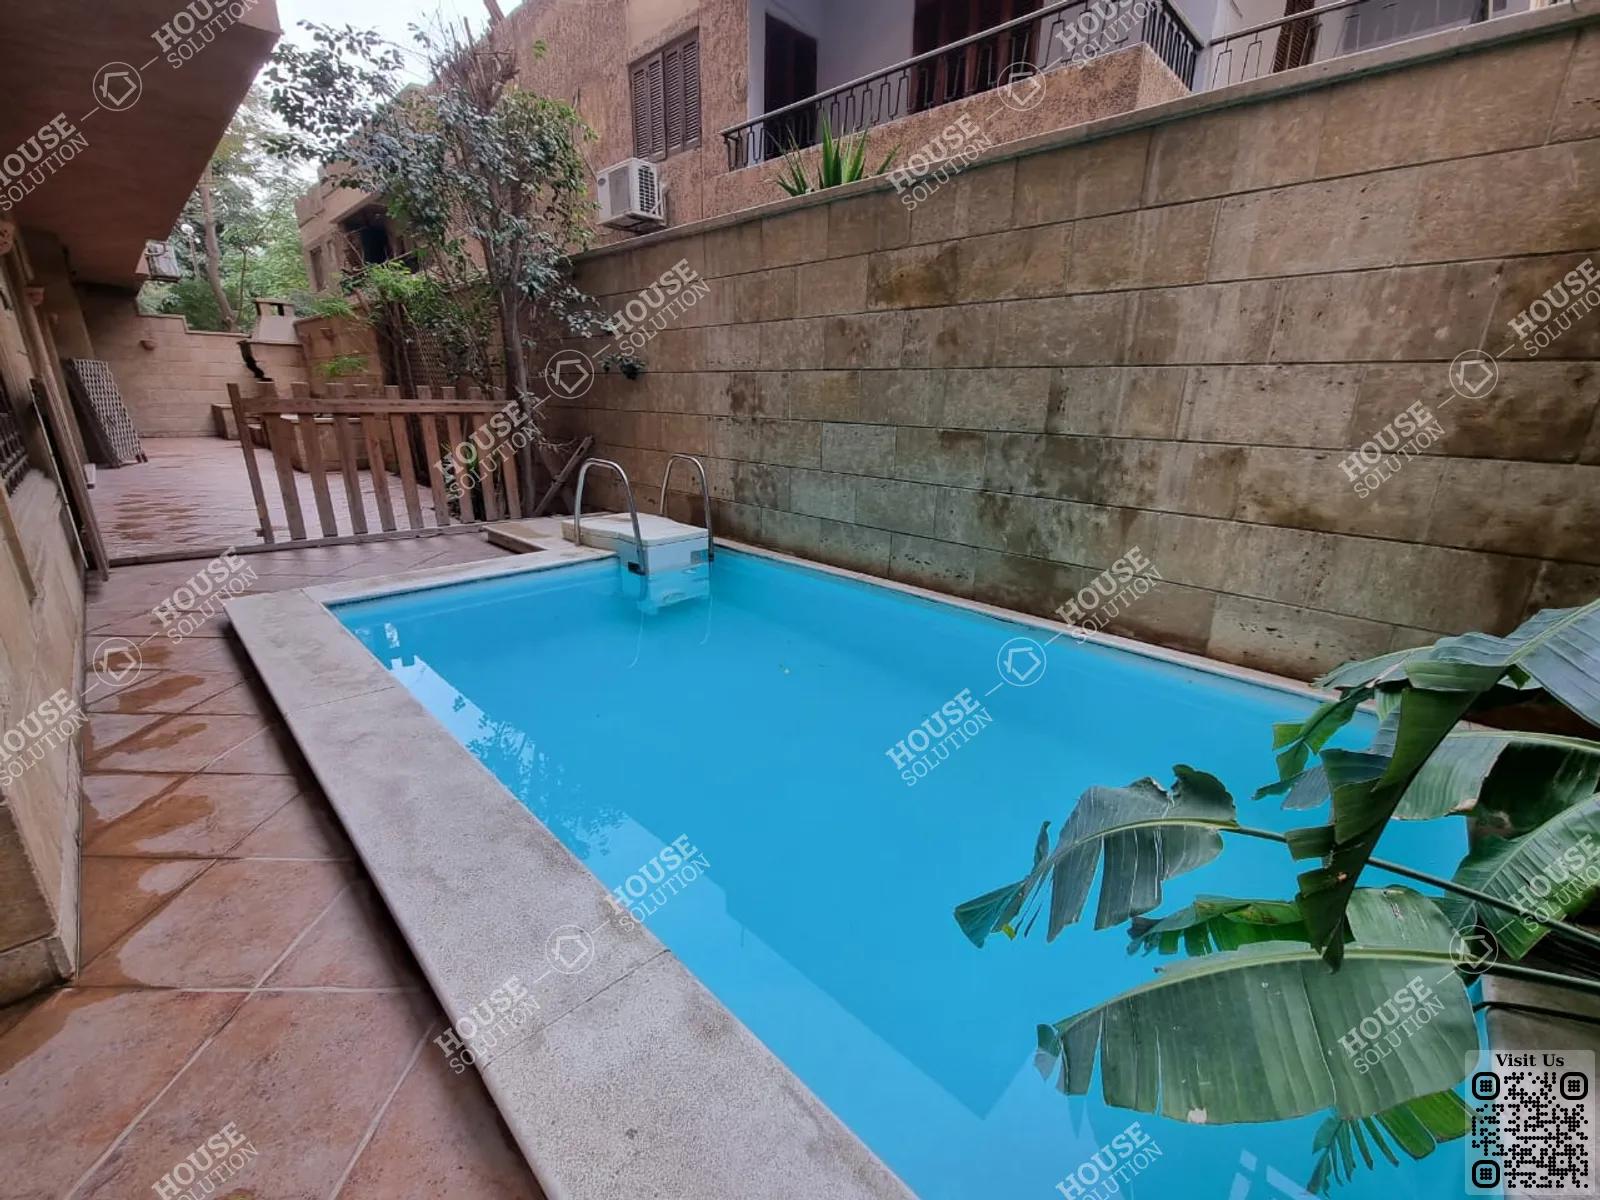 PRIVATE SWIMMING POOL  @ Ground Floors For Rent In Maadi Maadi Degla Area: 400 m² consists of 5 Bedrooms 4 Bathrooms Semi furnished 5 stars #5689-0